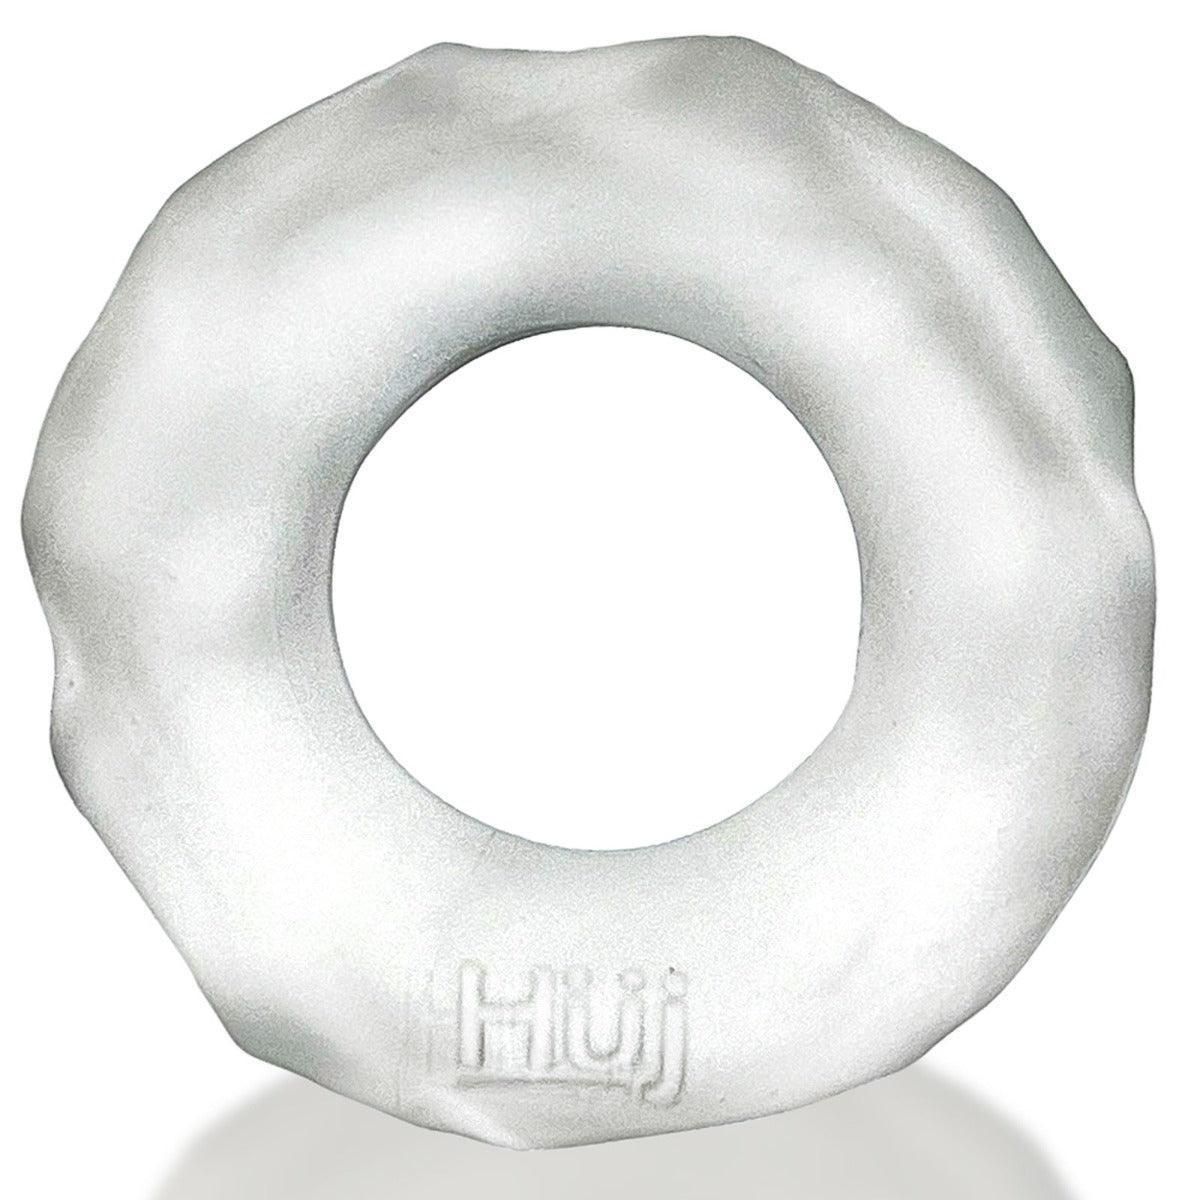 Hunkyjunk Fractal Tactile Silicone Cockring Clear Ice